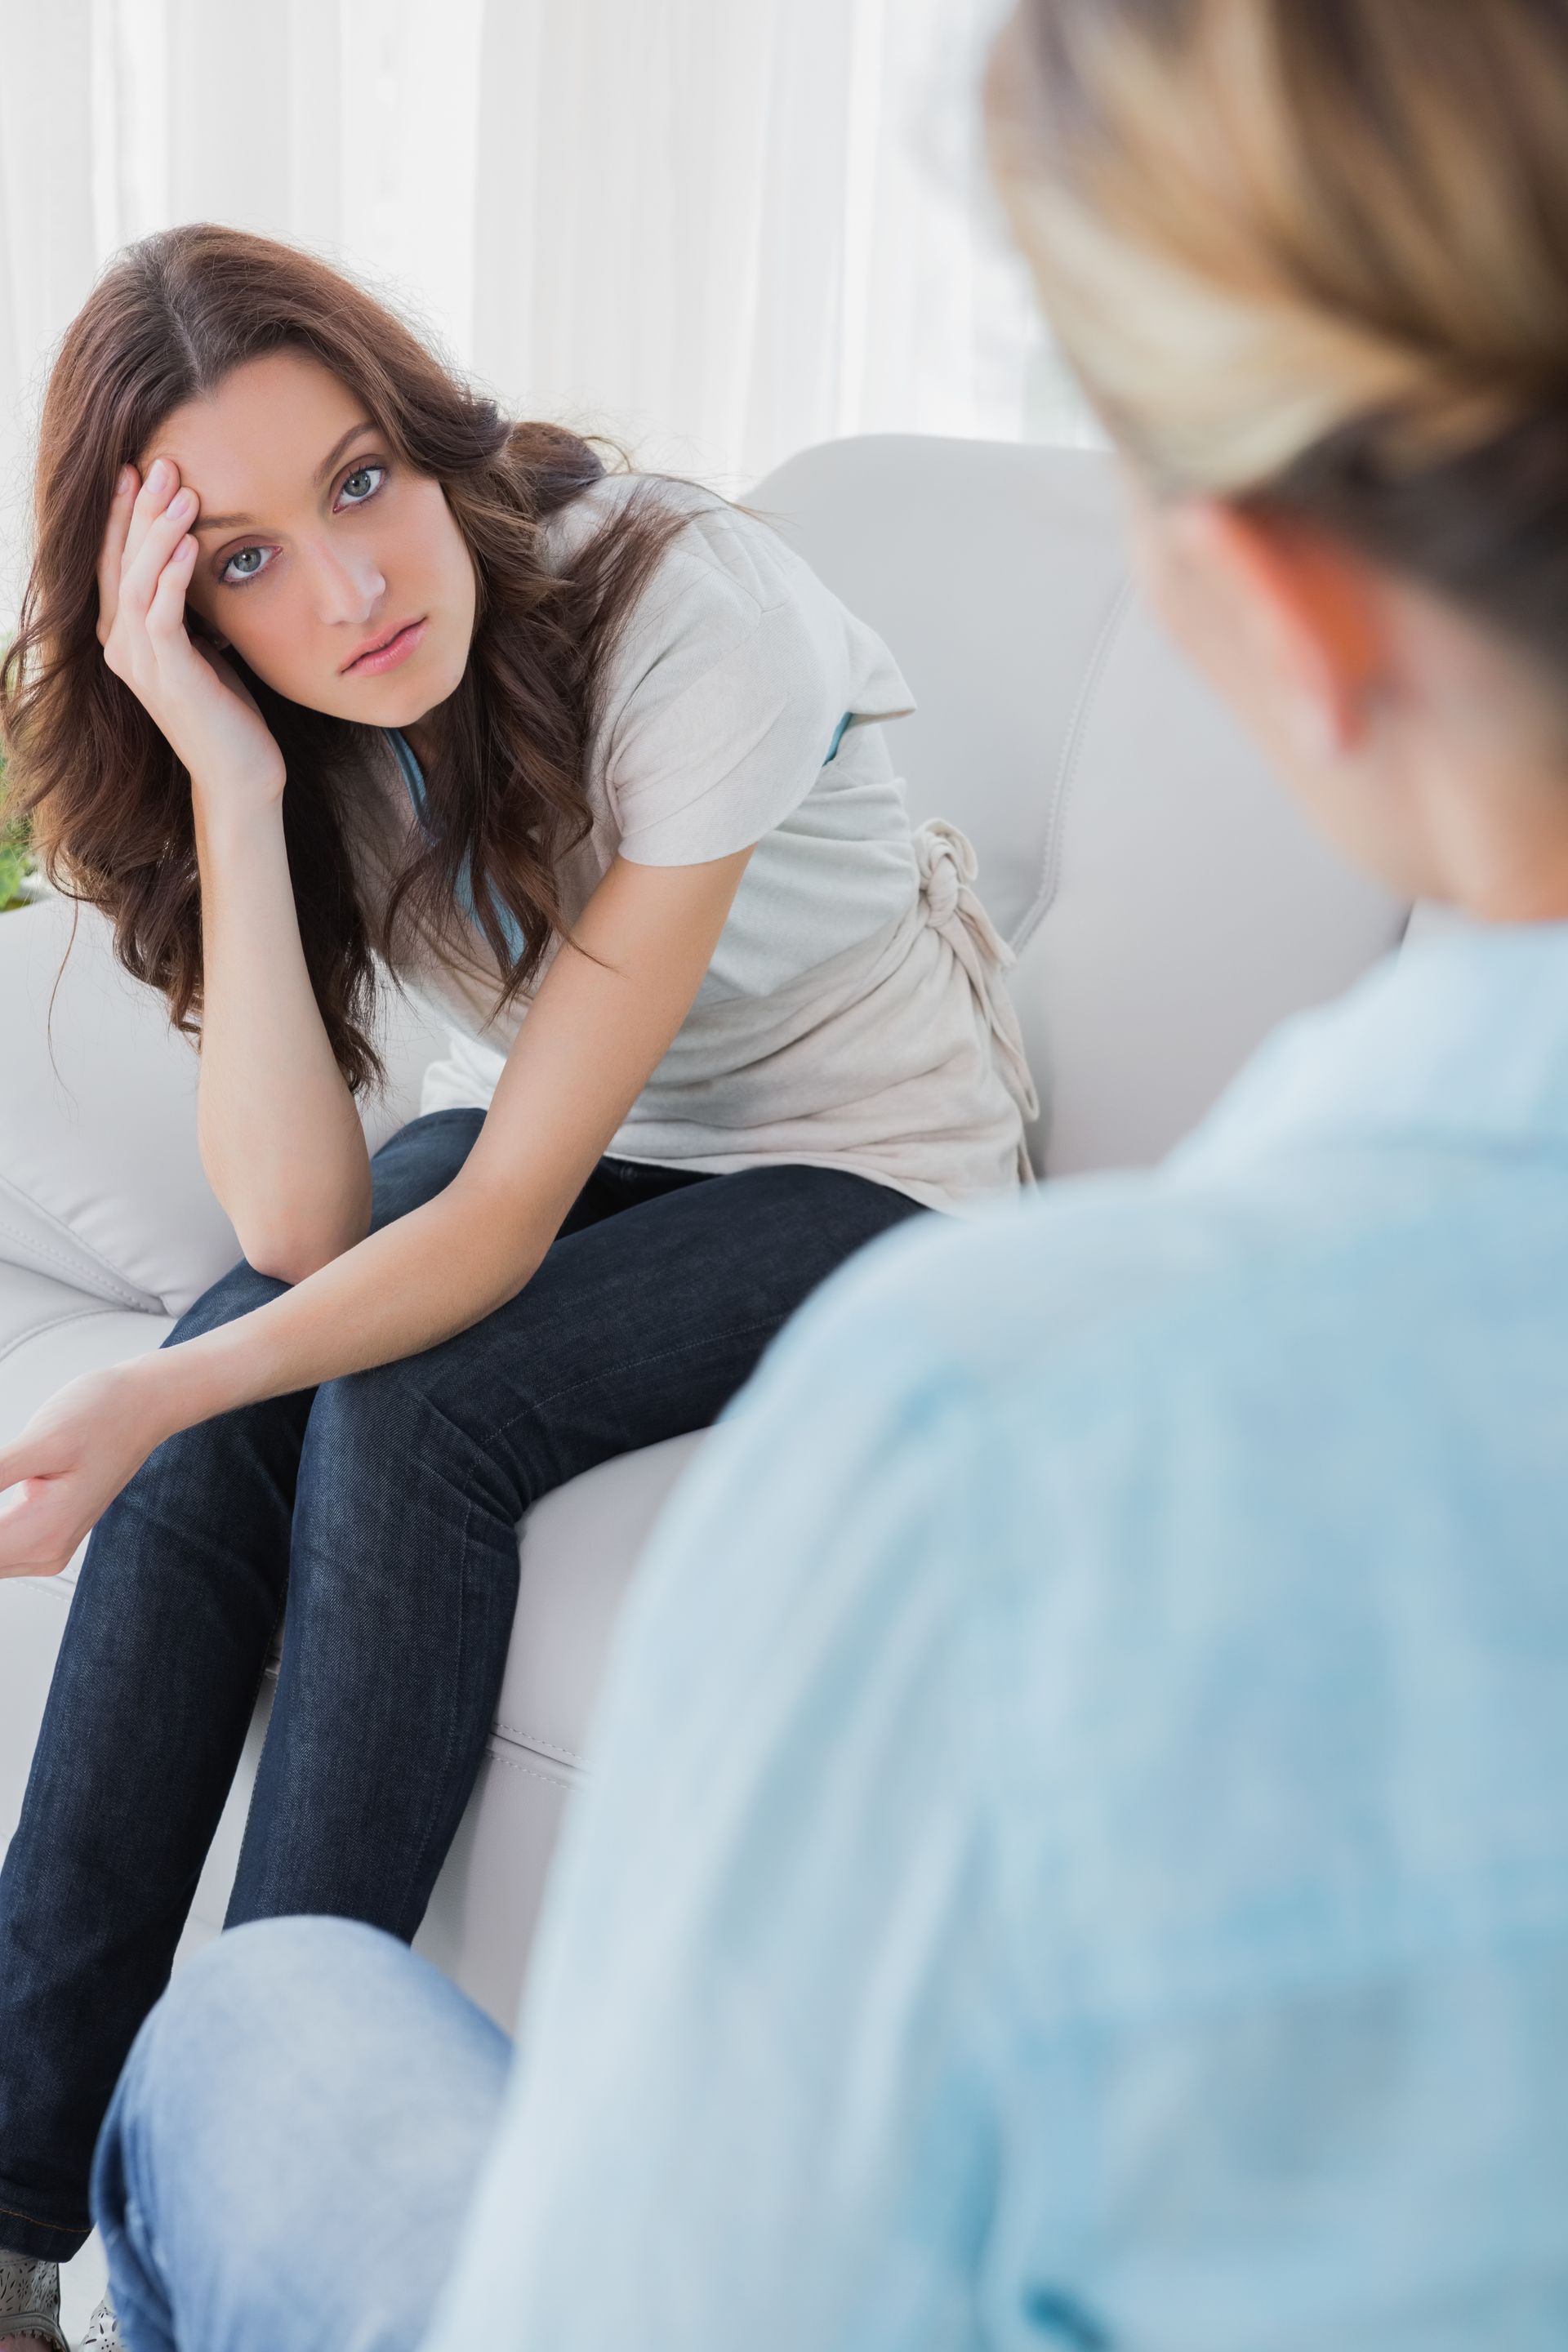 Young adult woman having a counseling